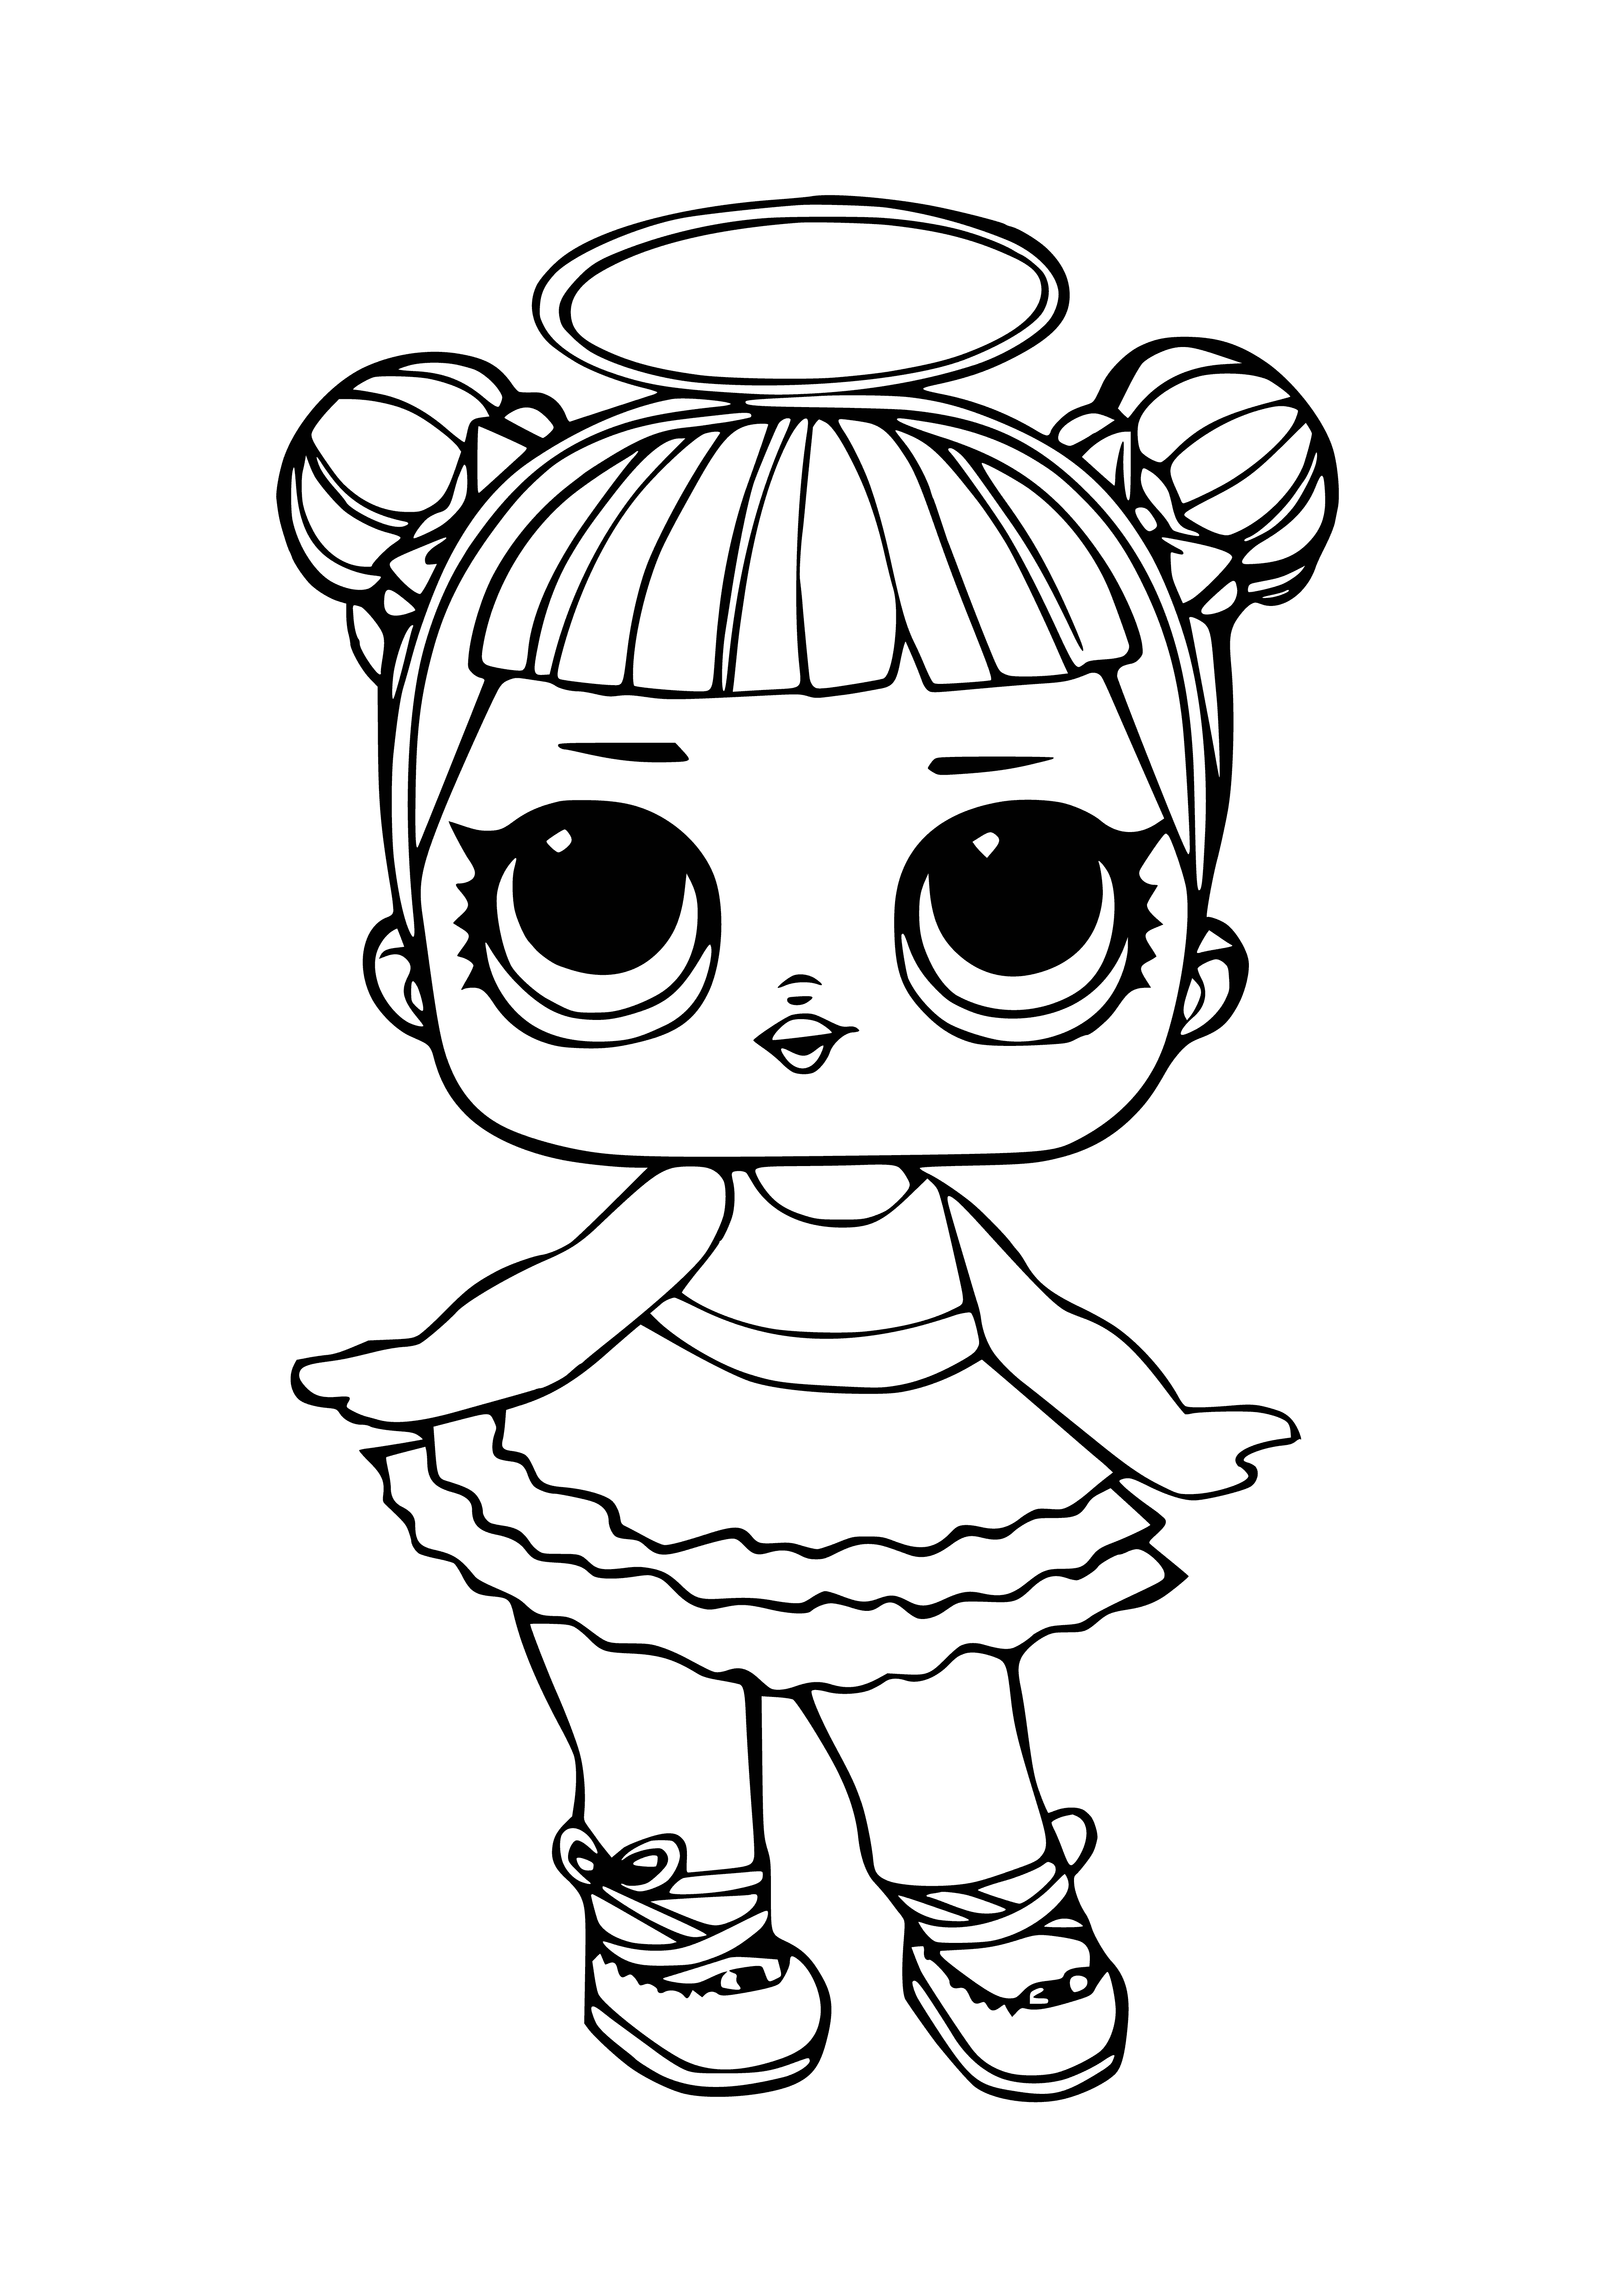 coloring page: #LOLSurprise #LOL #Toys 

Toy girl with blonde ponytail and pink outfit holding a lollipop, from the LOL Sugar Series 2 range. #LOLSurprise #LOL #Toys